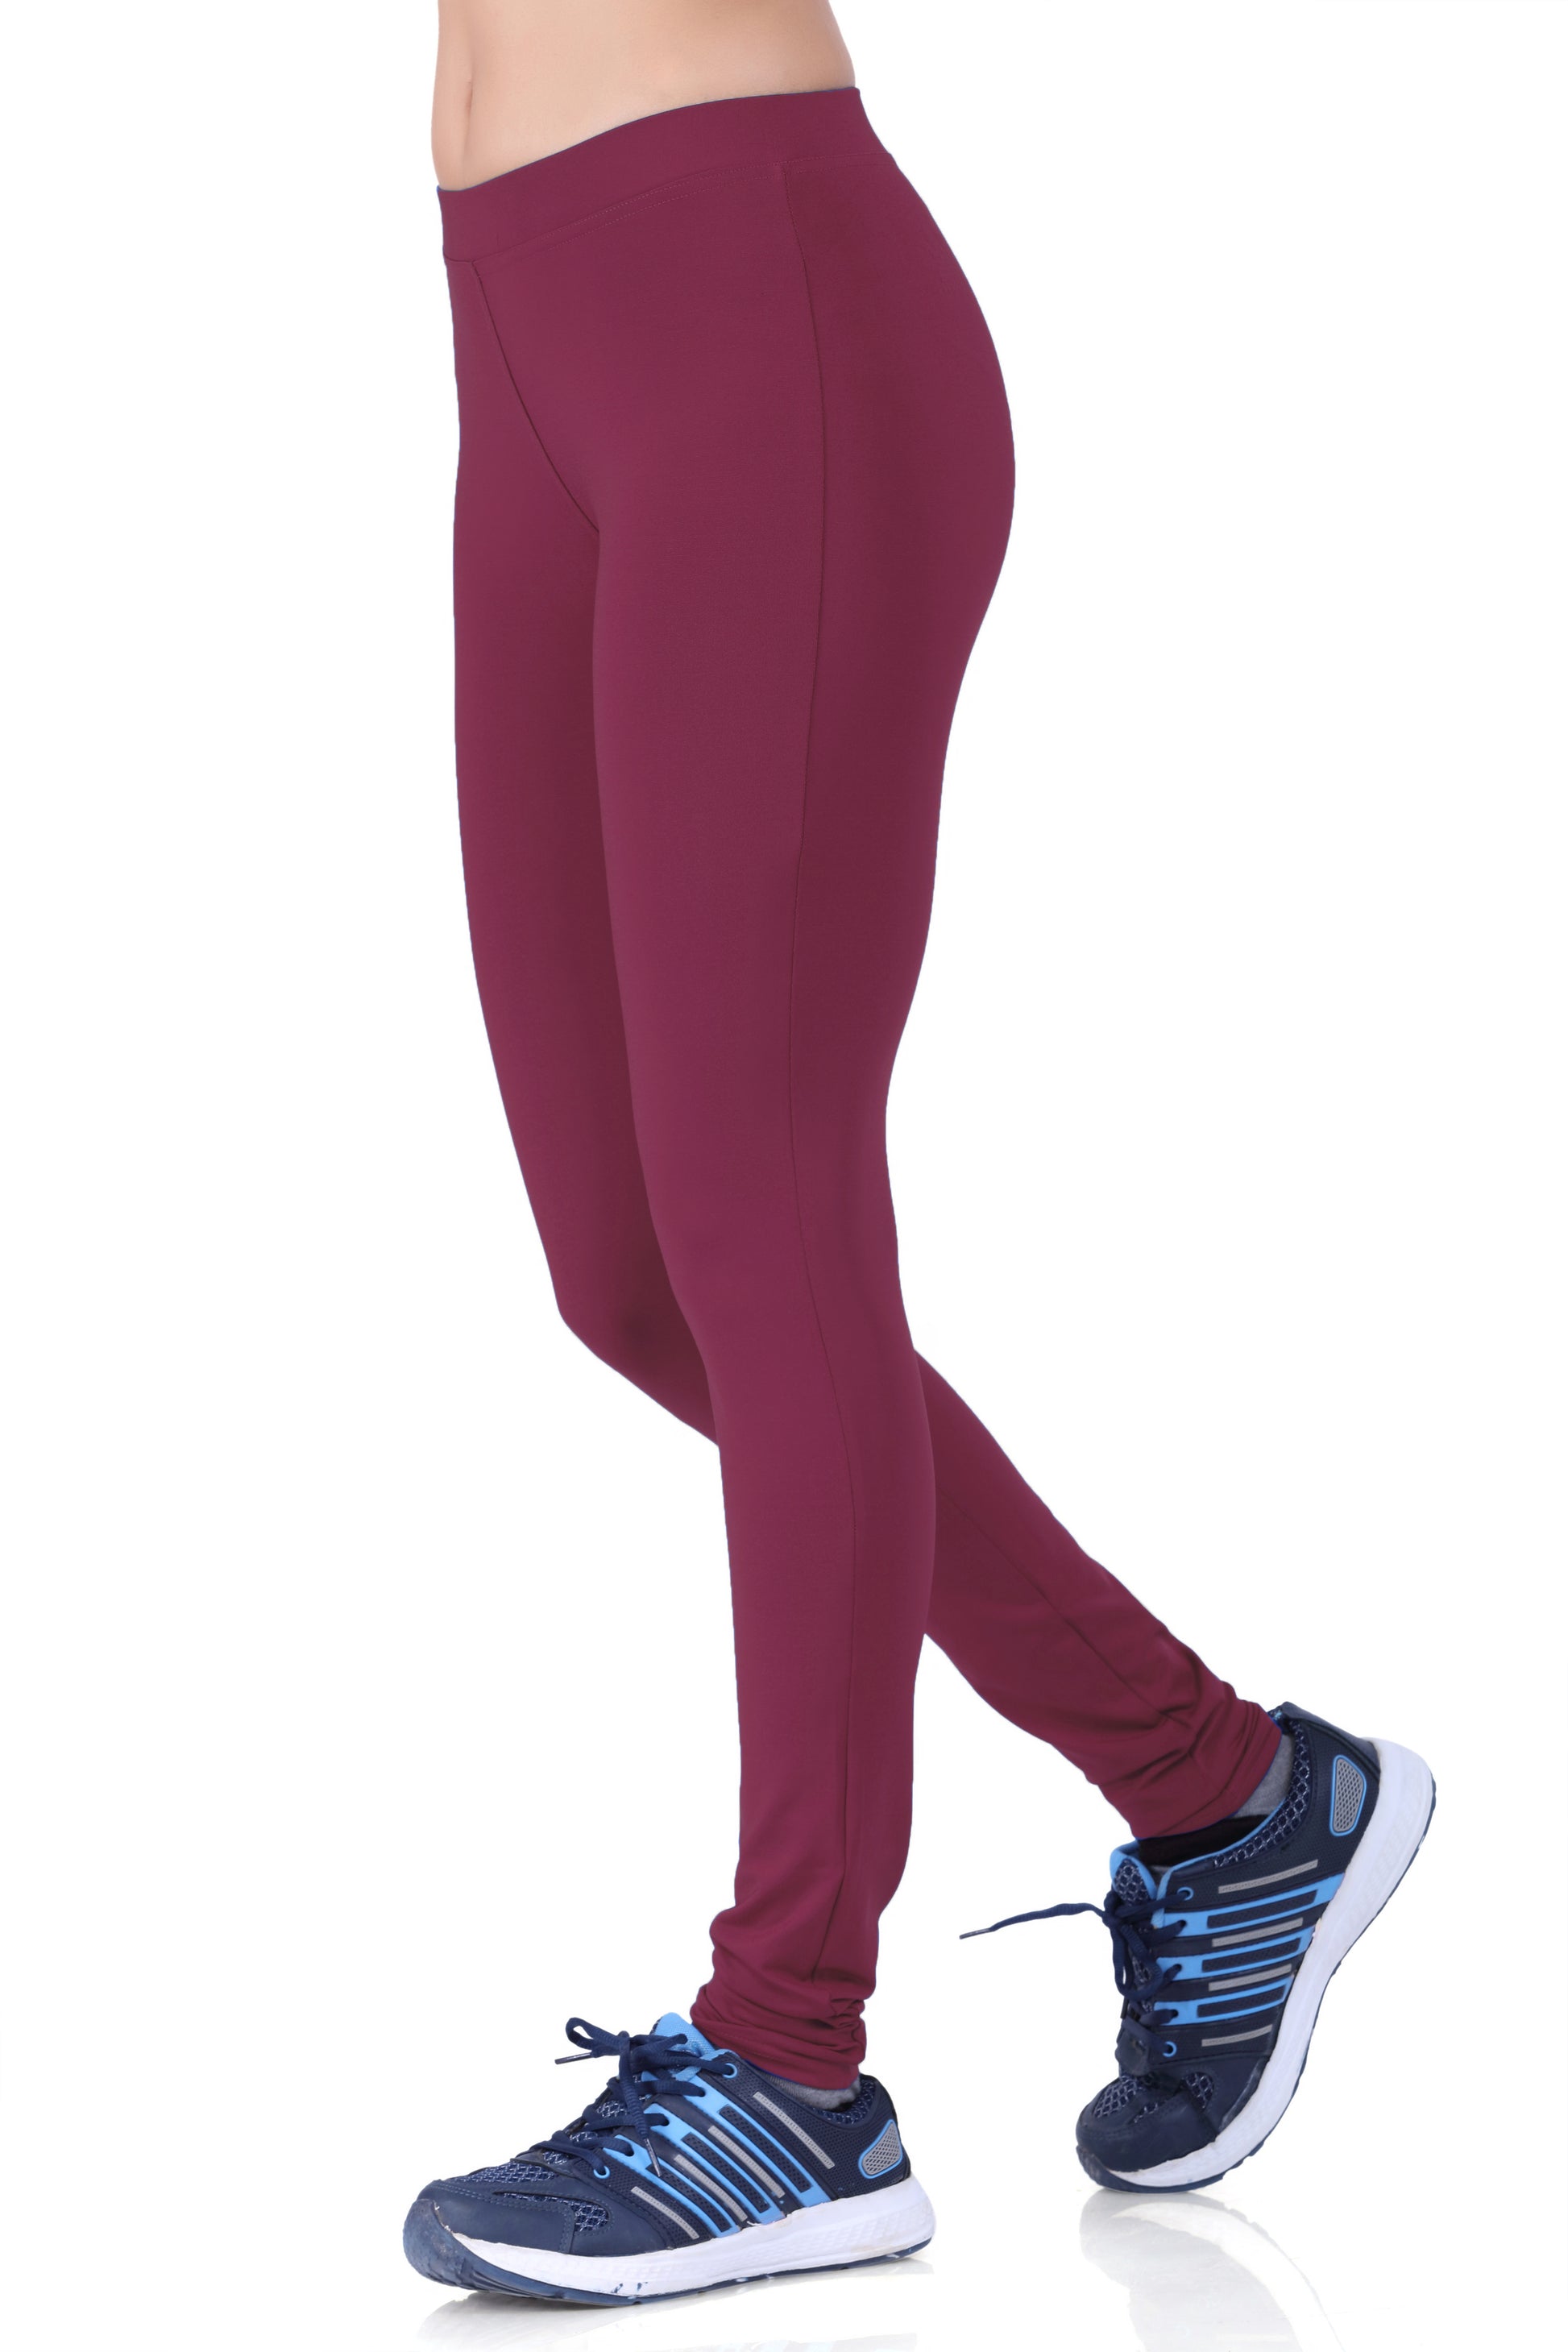 Magenta Leggings Outfit  International Society of Precision